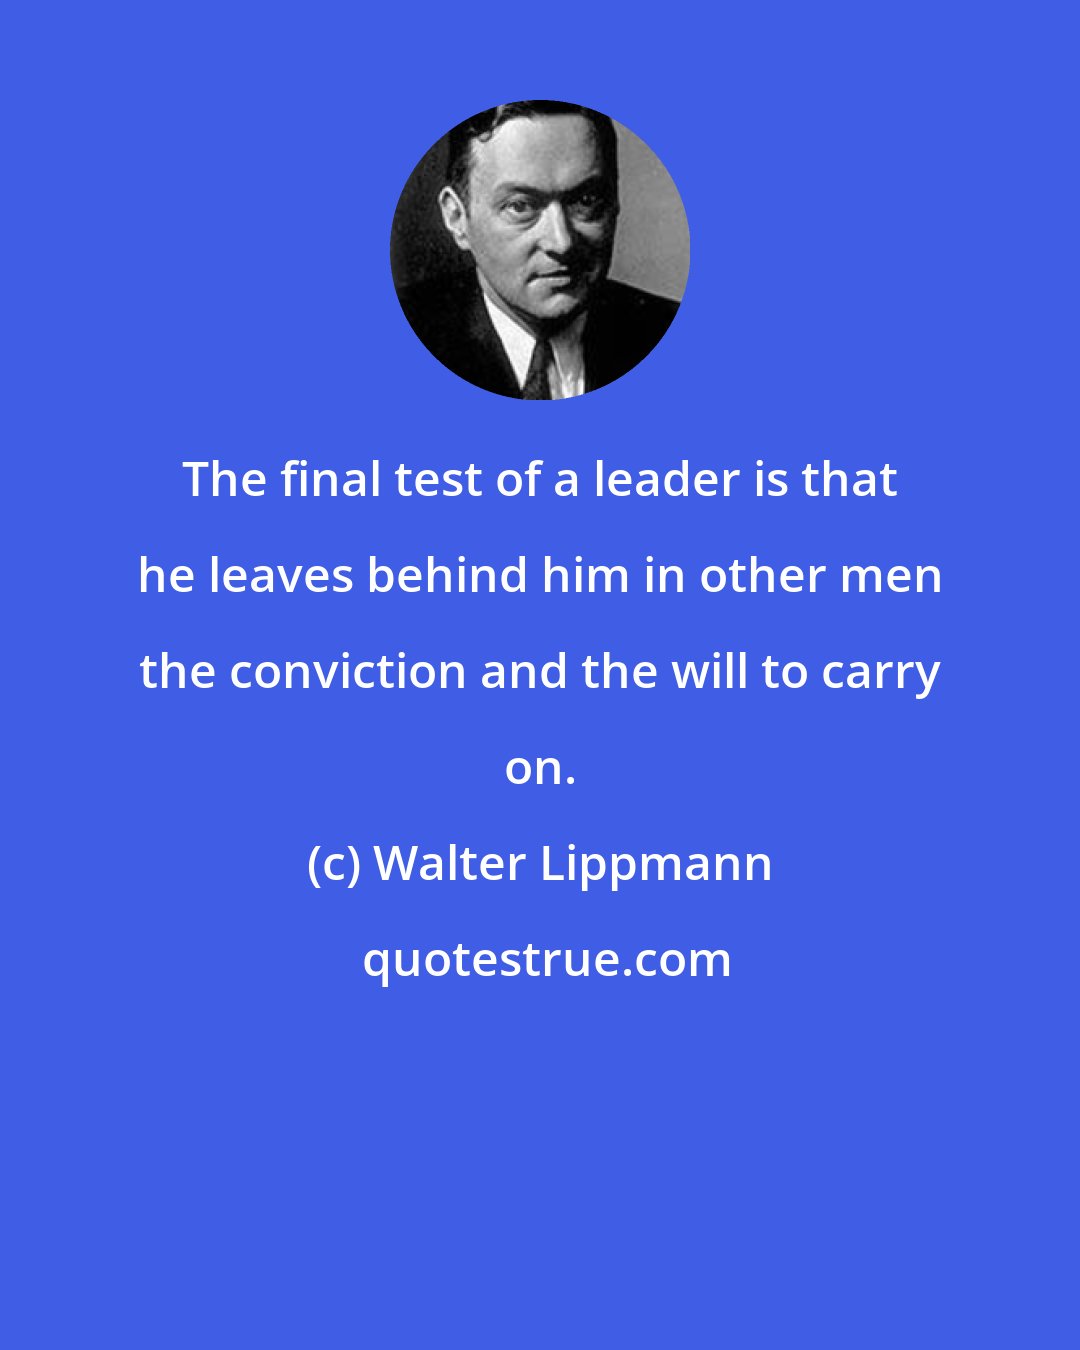 Walter Lippmann: The final test of a leader is that he leaves behind him in other men the conviction and the will to carry on.